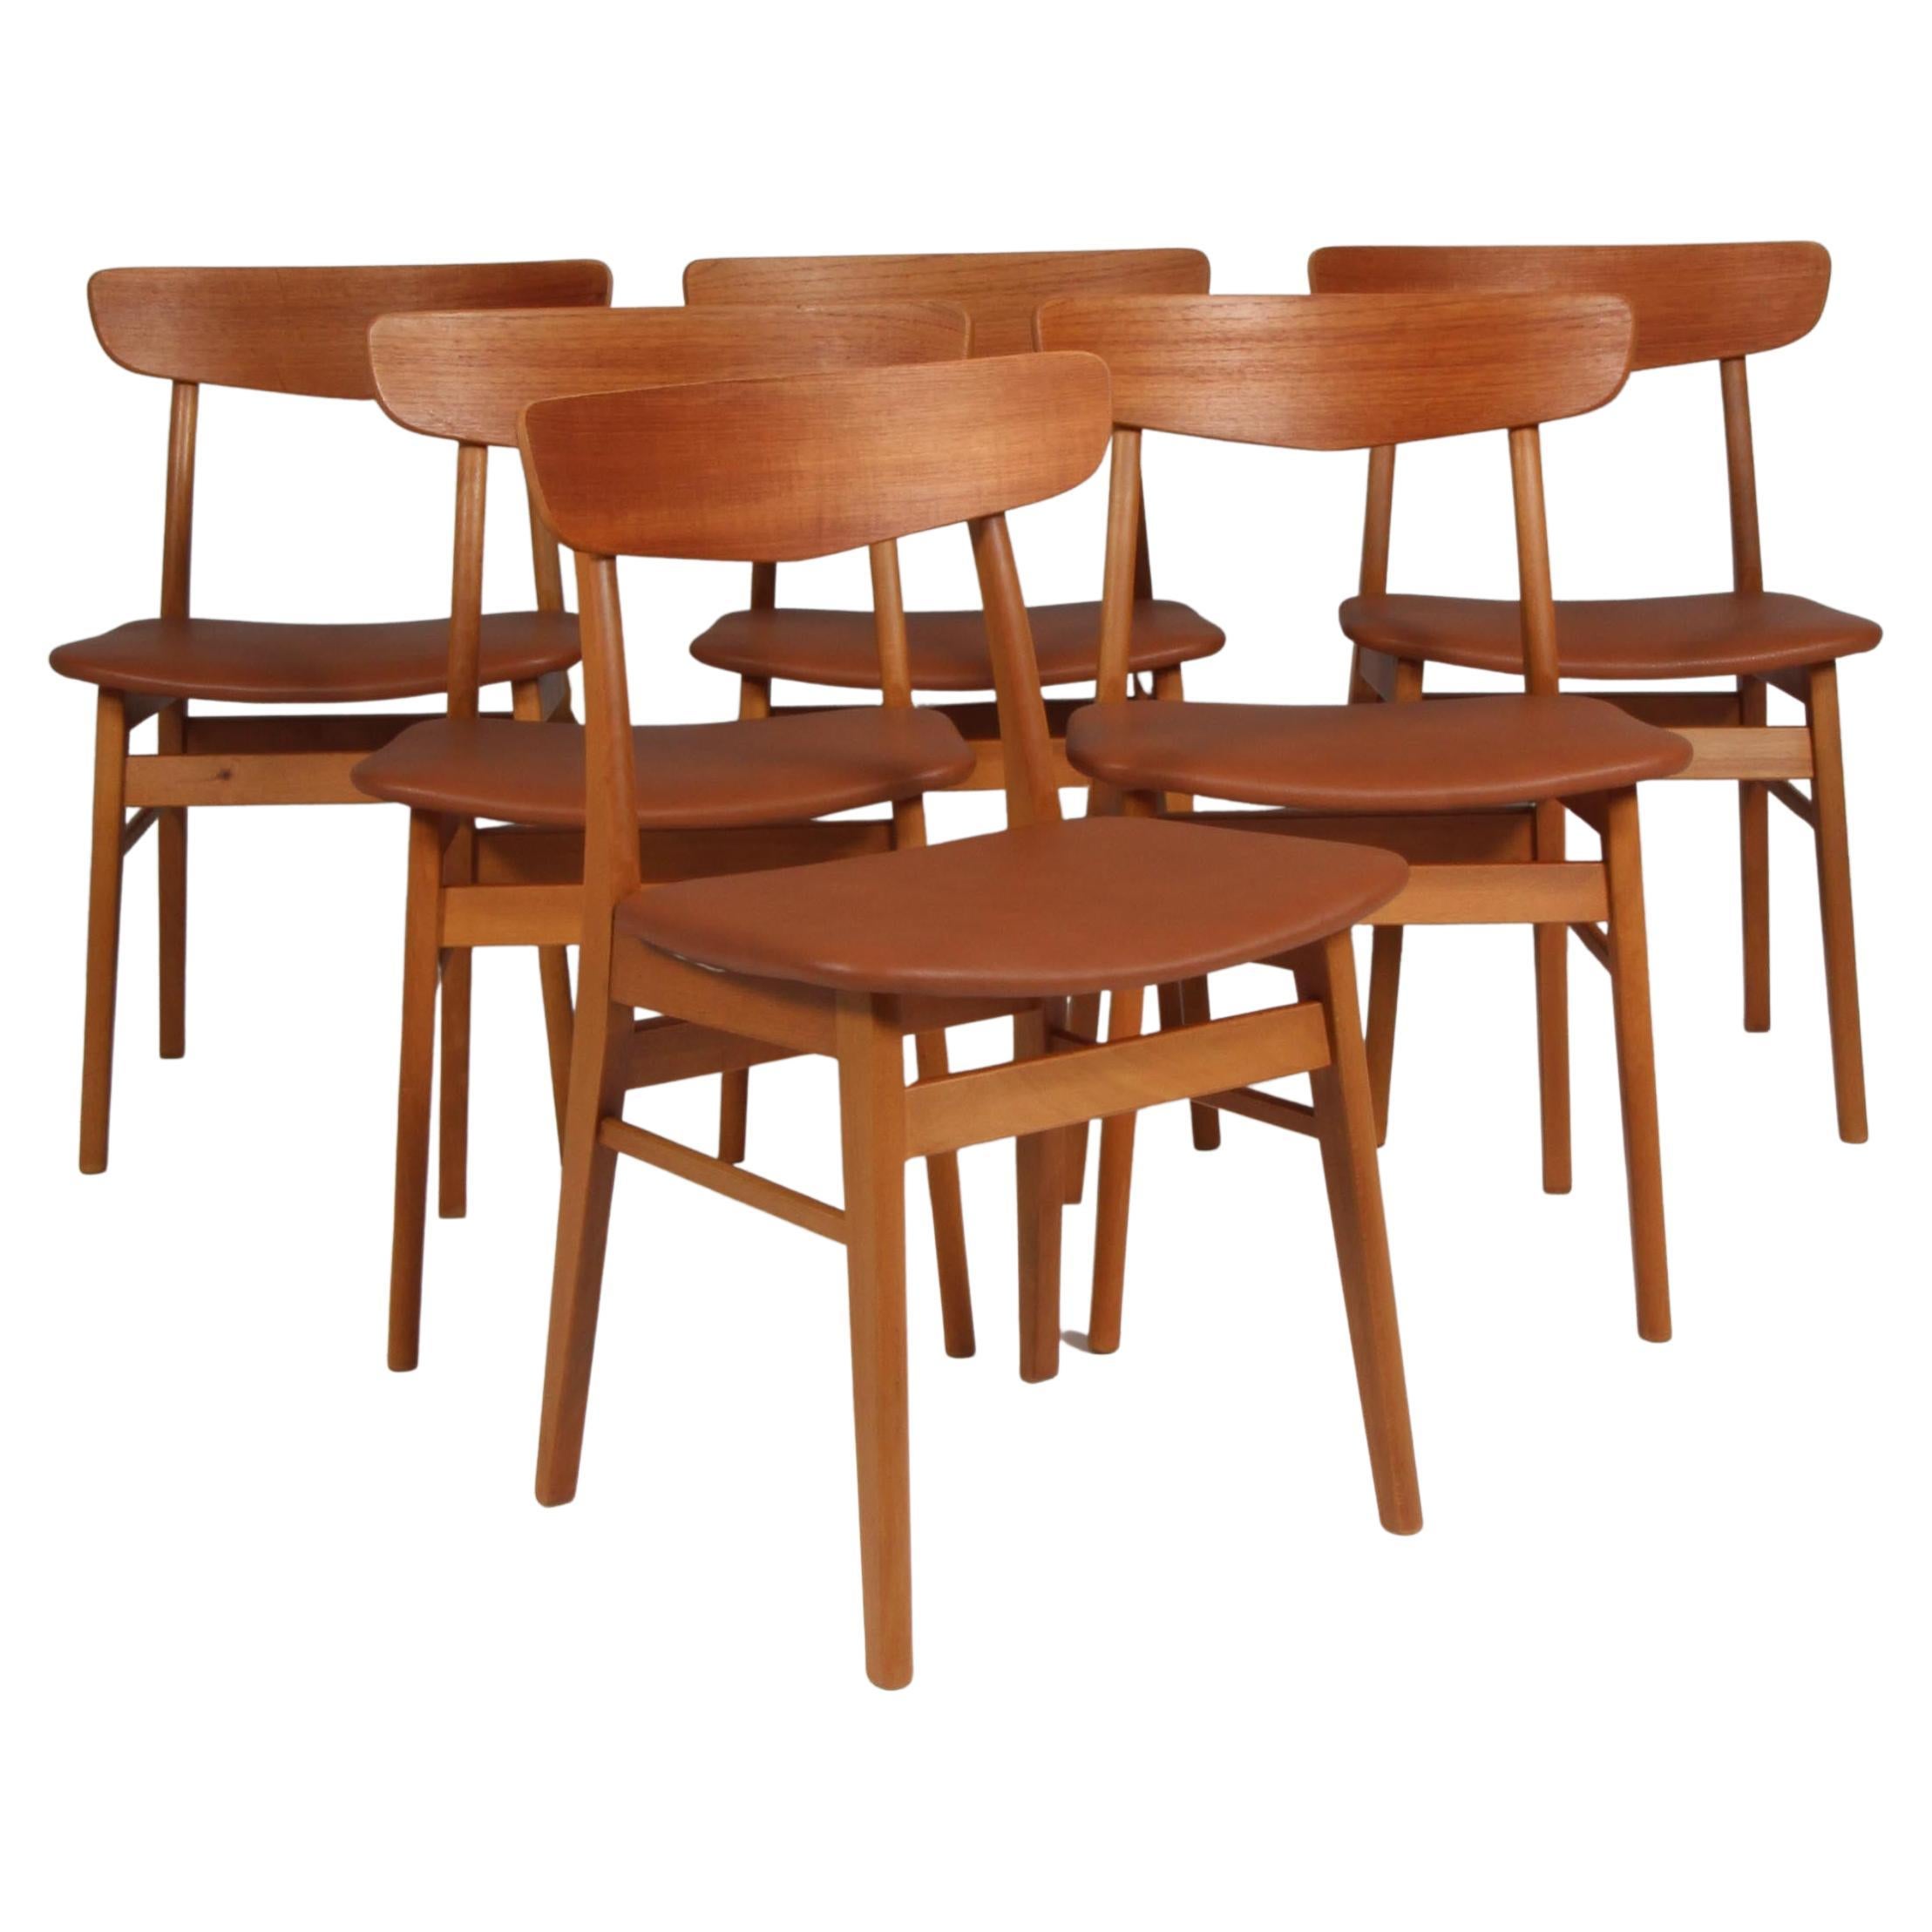 Farstrup Set of Dining Chairs in Teak and Aniline Leather. Denmark, 1960s For Sale